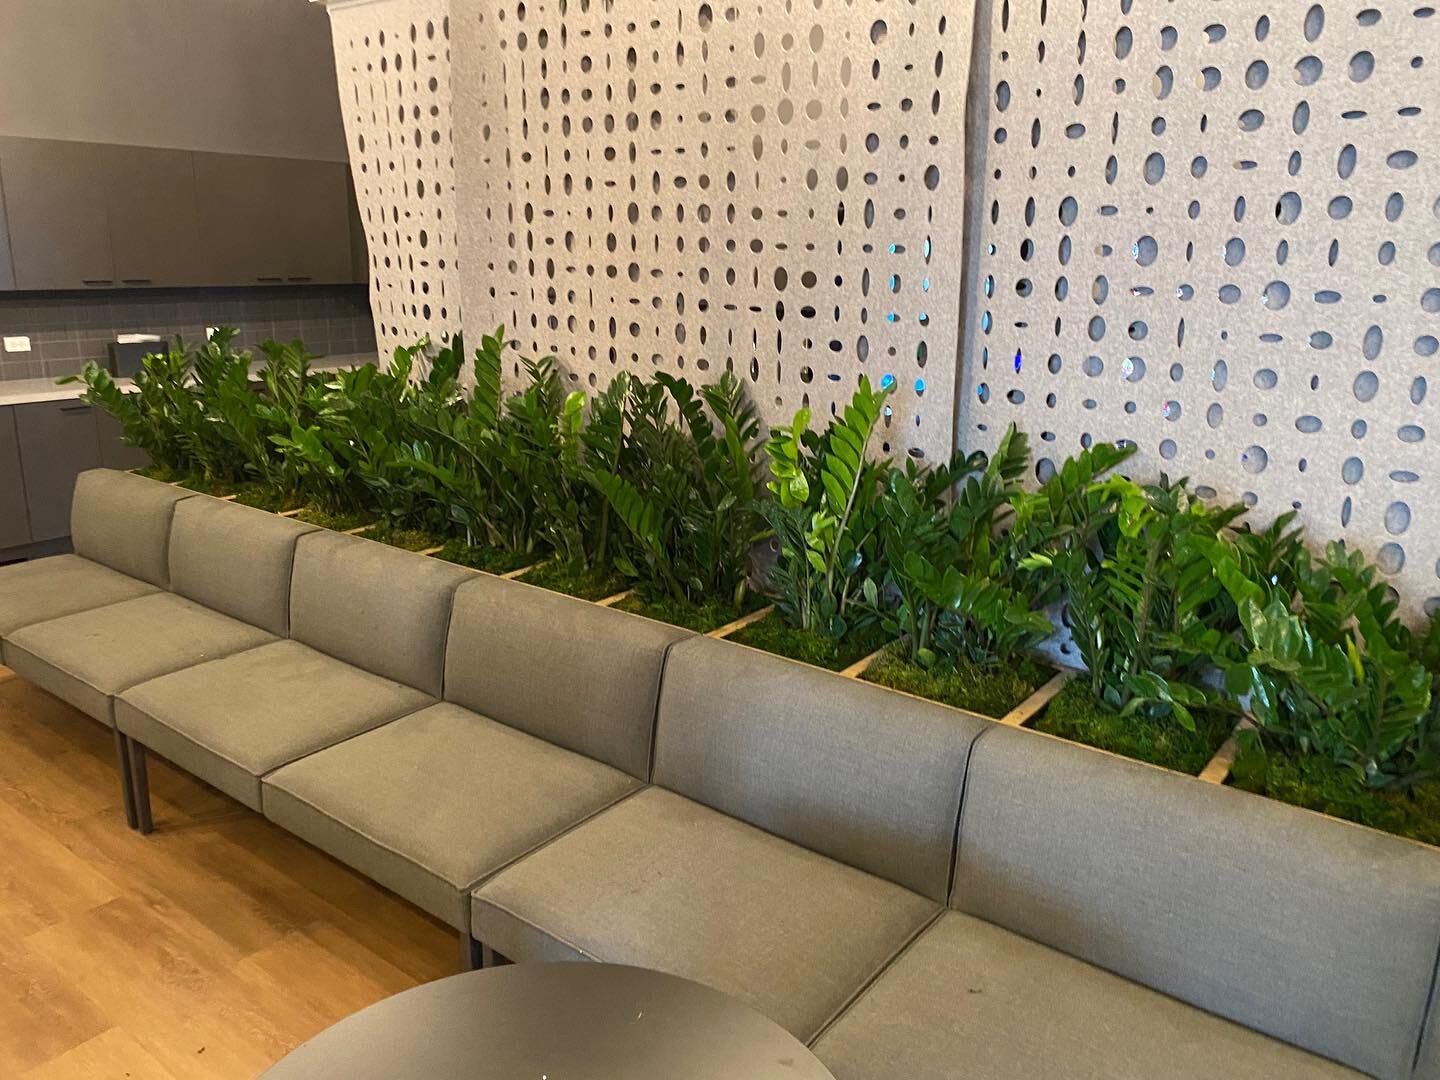 Looking for a little green in this Chicago snow!

#chicago #plantdesign #interiordesign #commercialdesign #plants